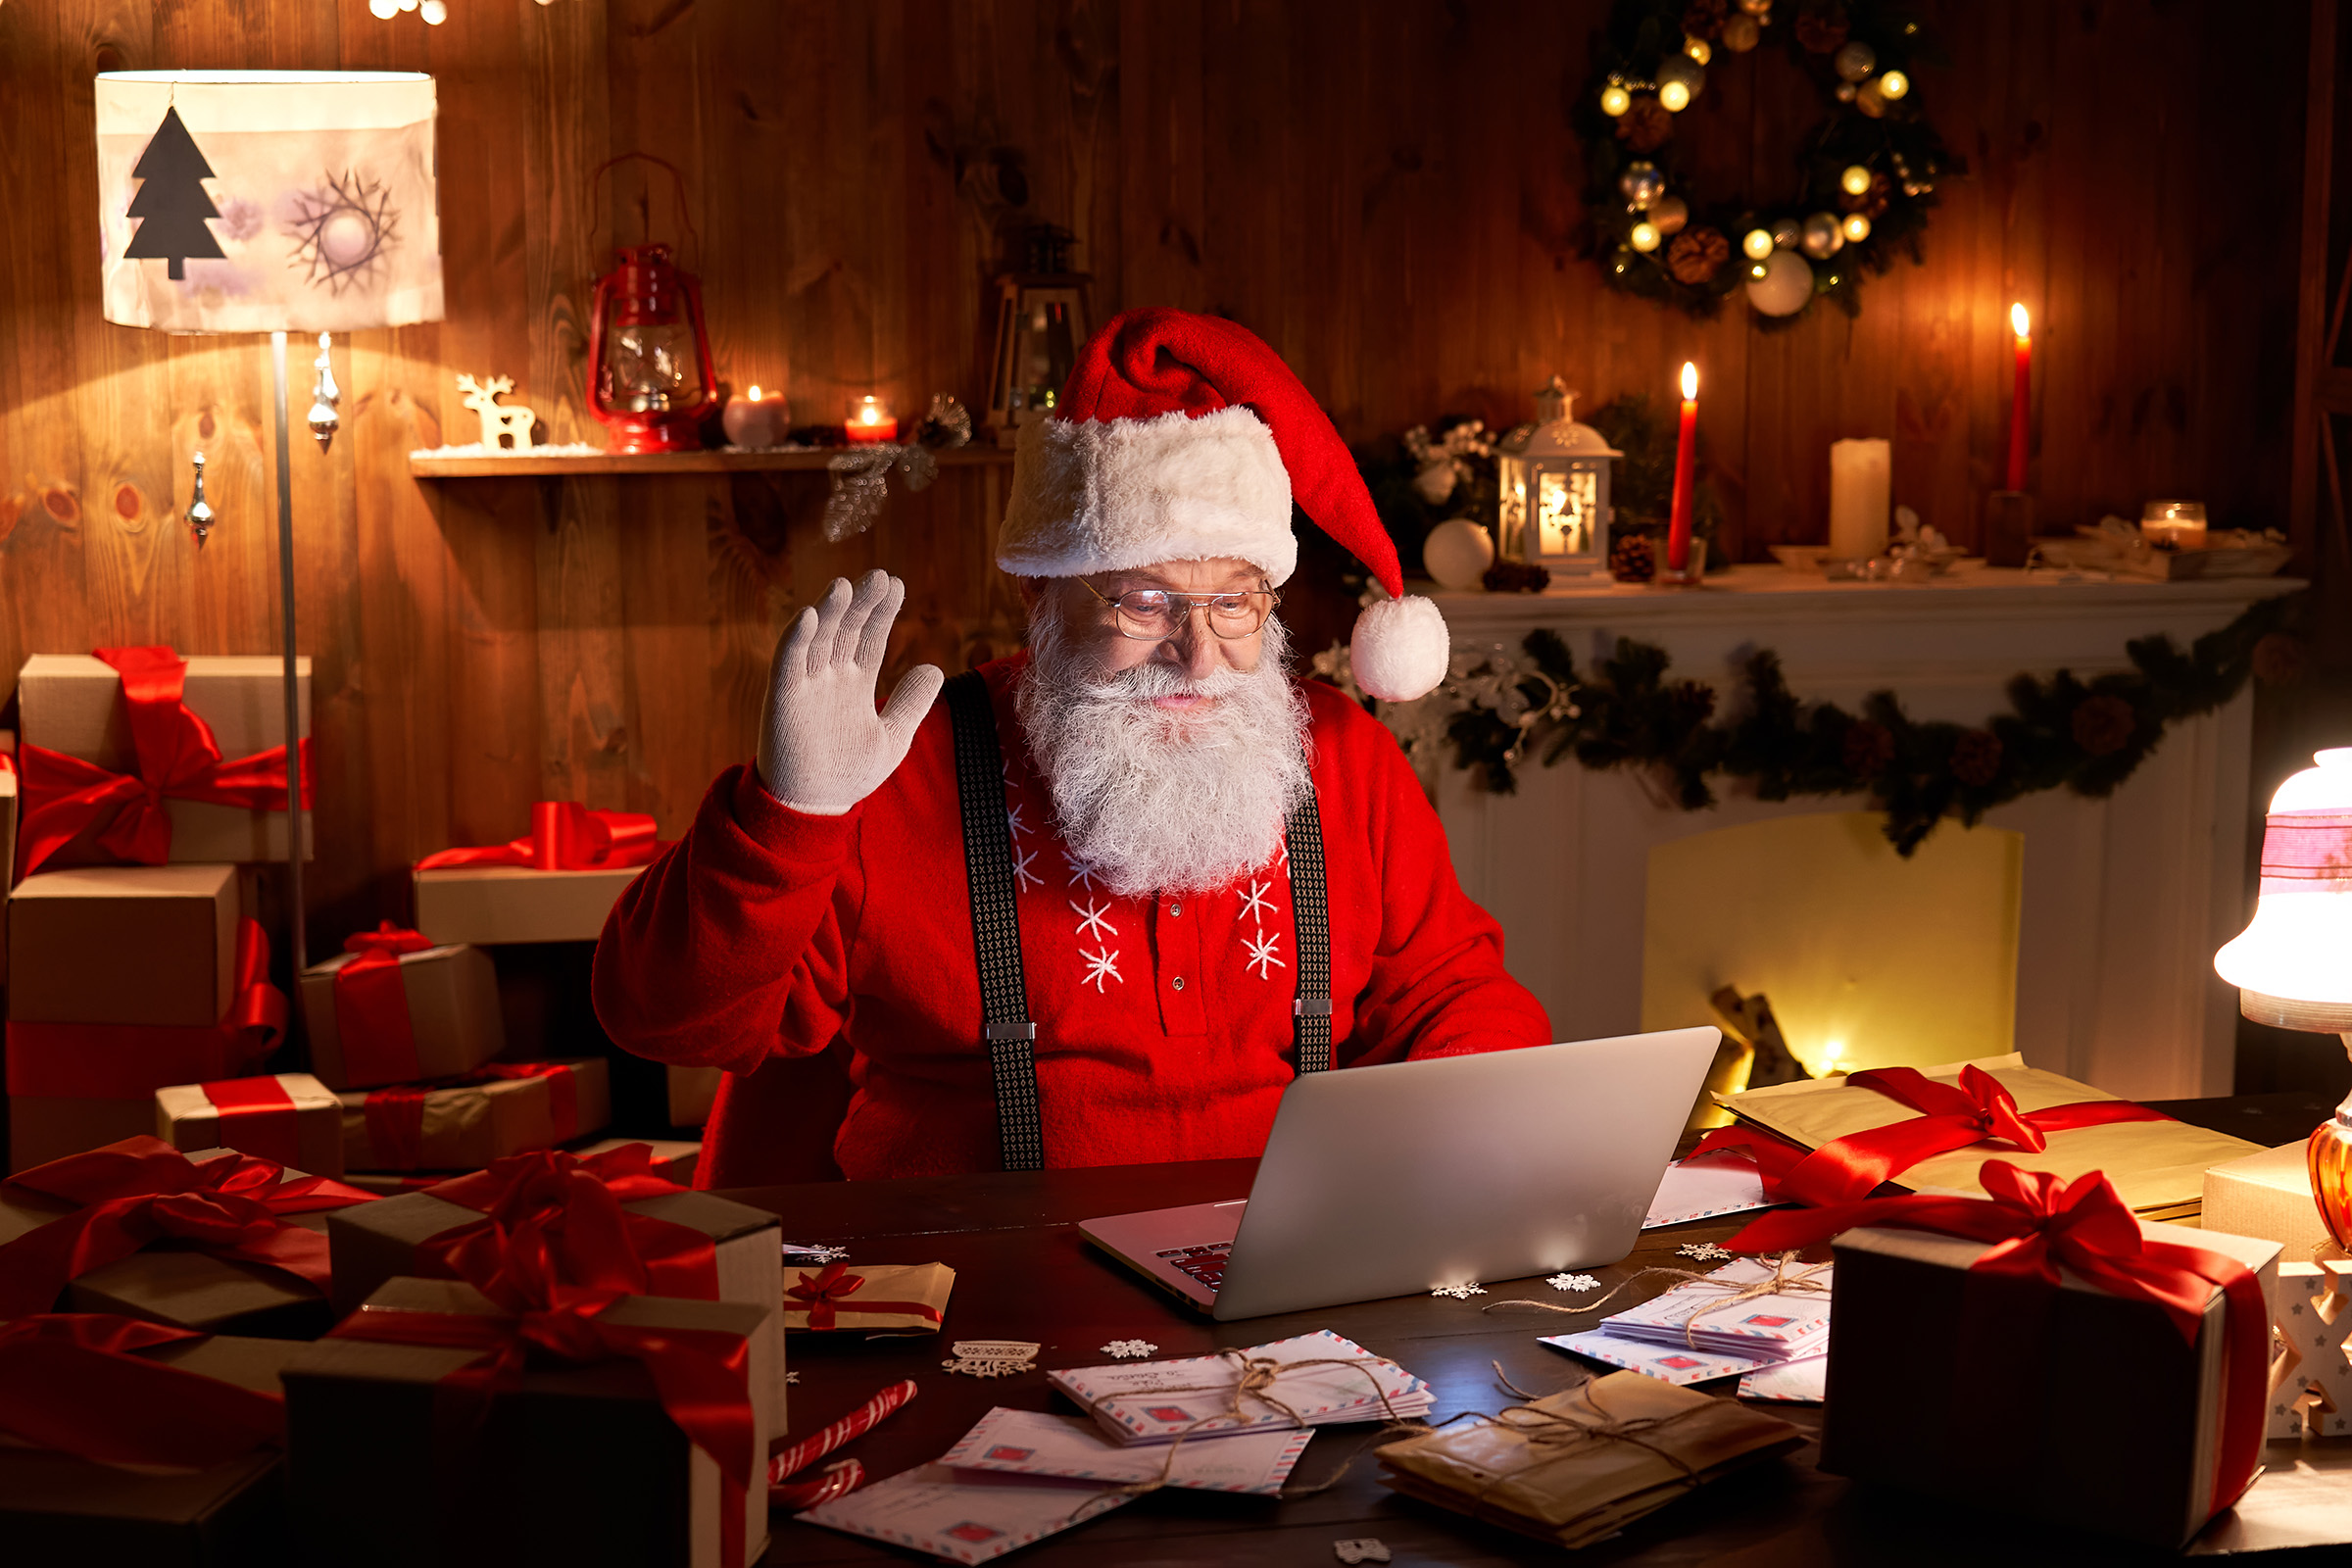 The pandemic has hastened the adoption of video visits as a way for Santas to reach children around the world. (Getty Images/iStockphoto)